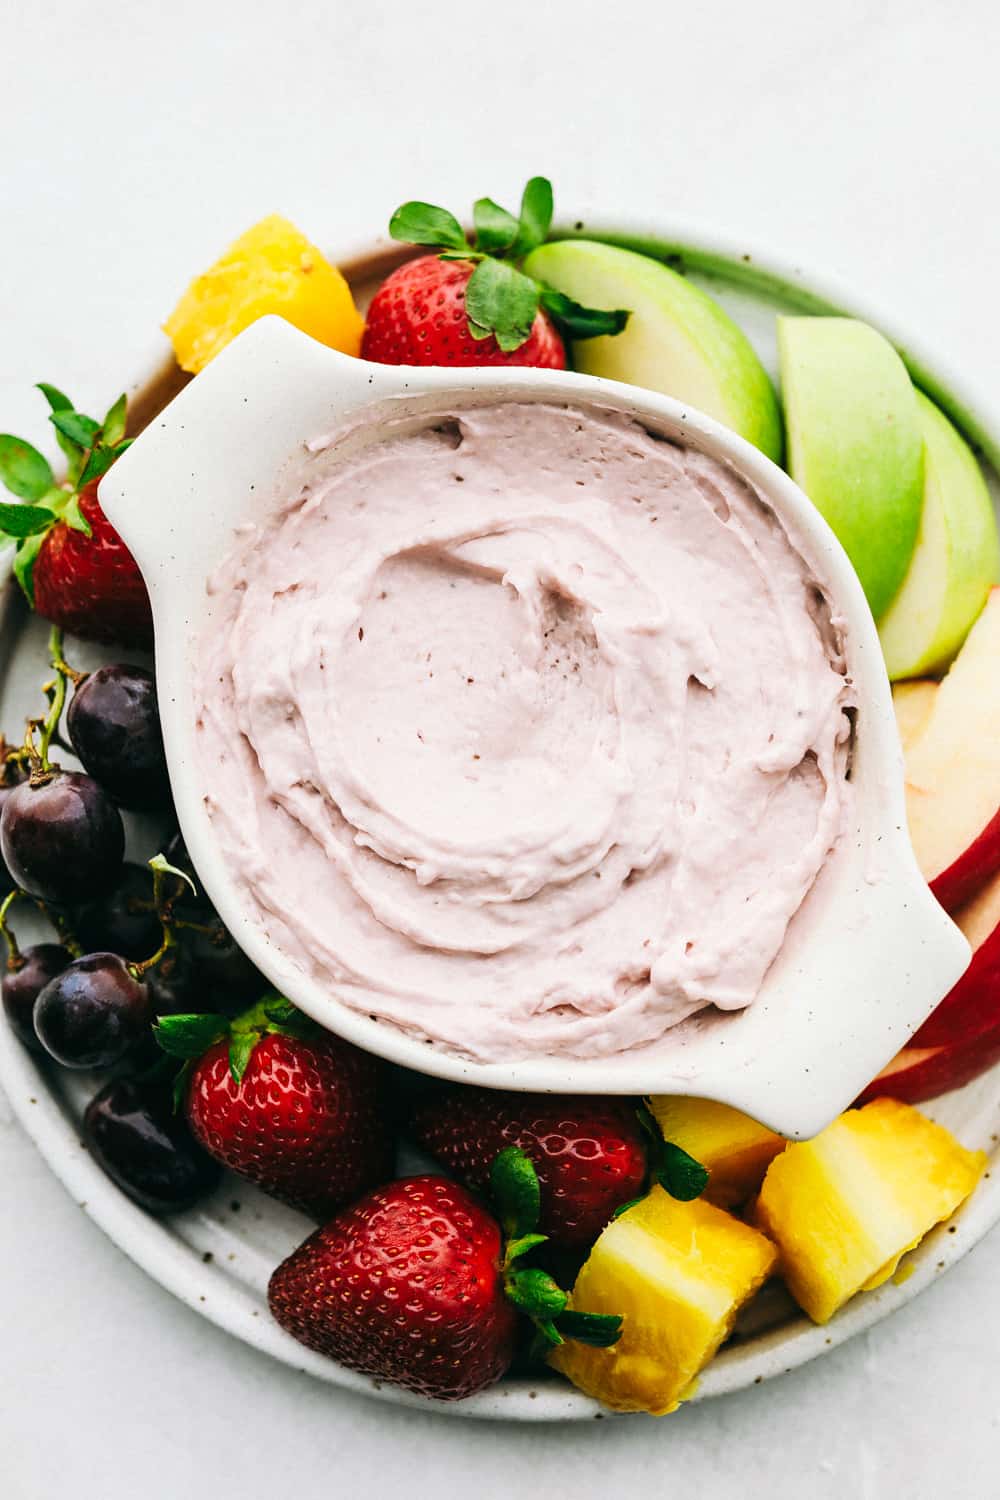 Strawberry Cream Cheese Fruit Dip (2 Ingredients) | The Recipe Critic